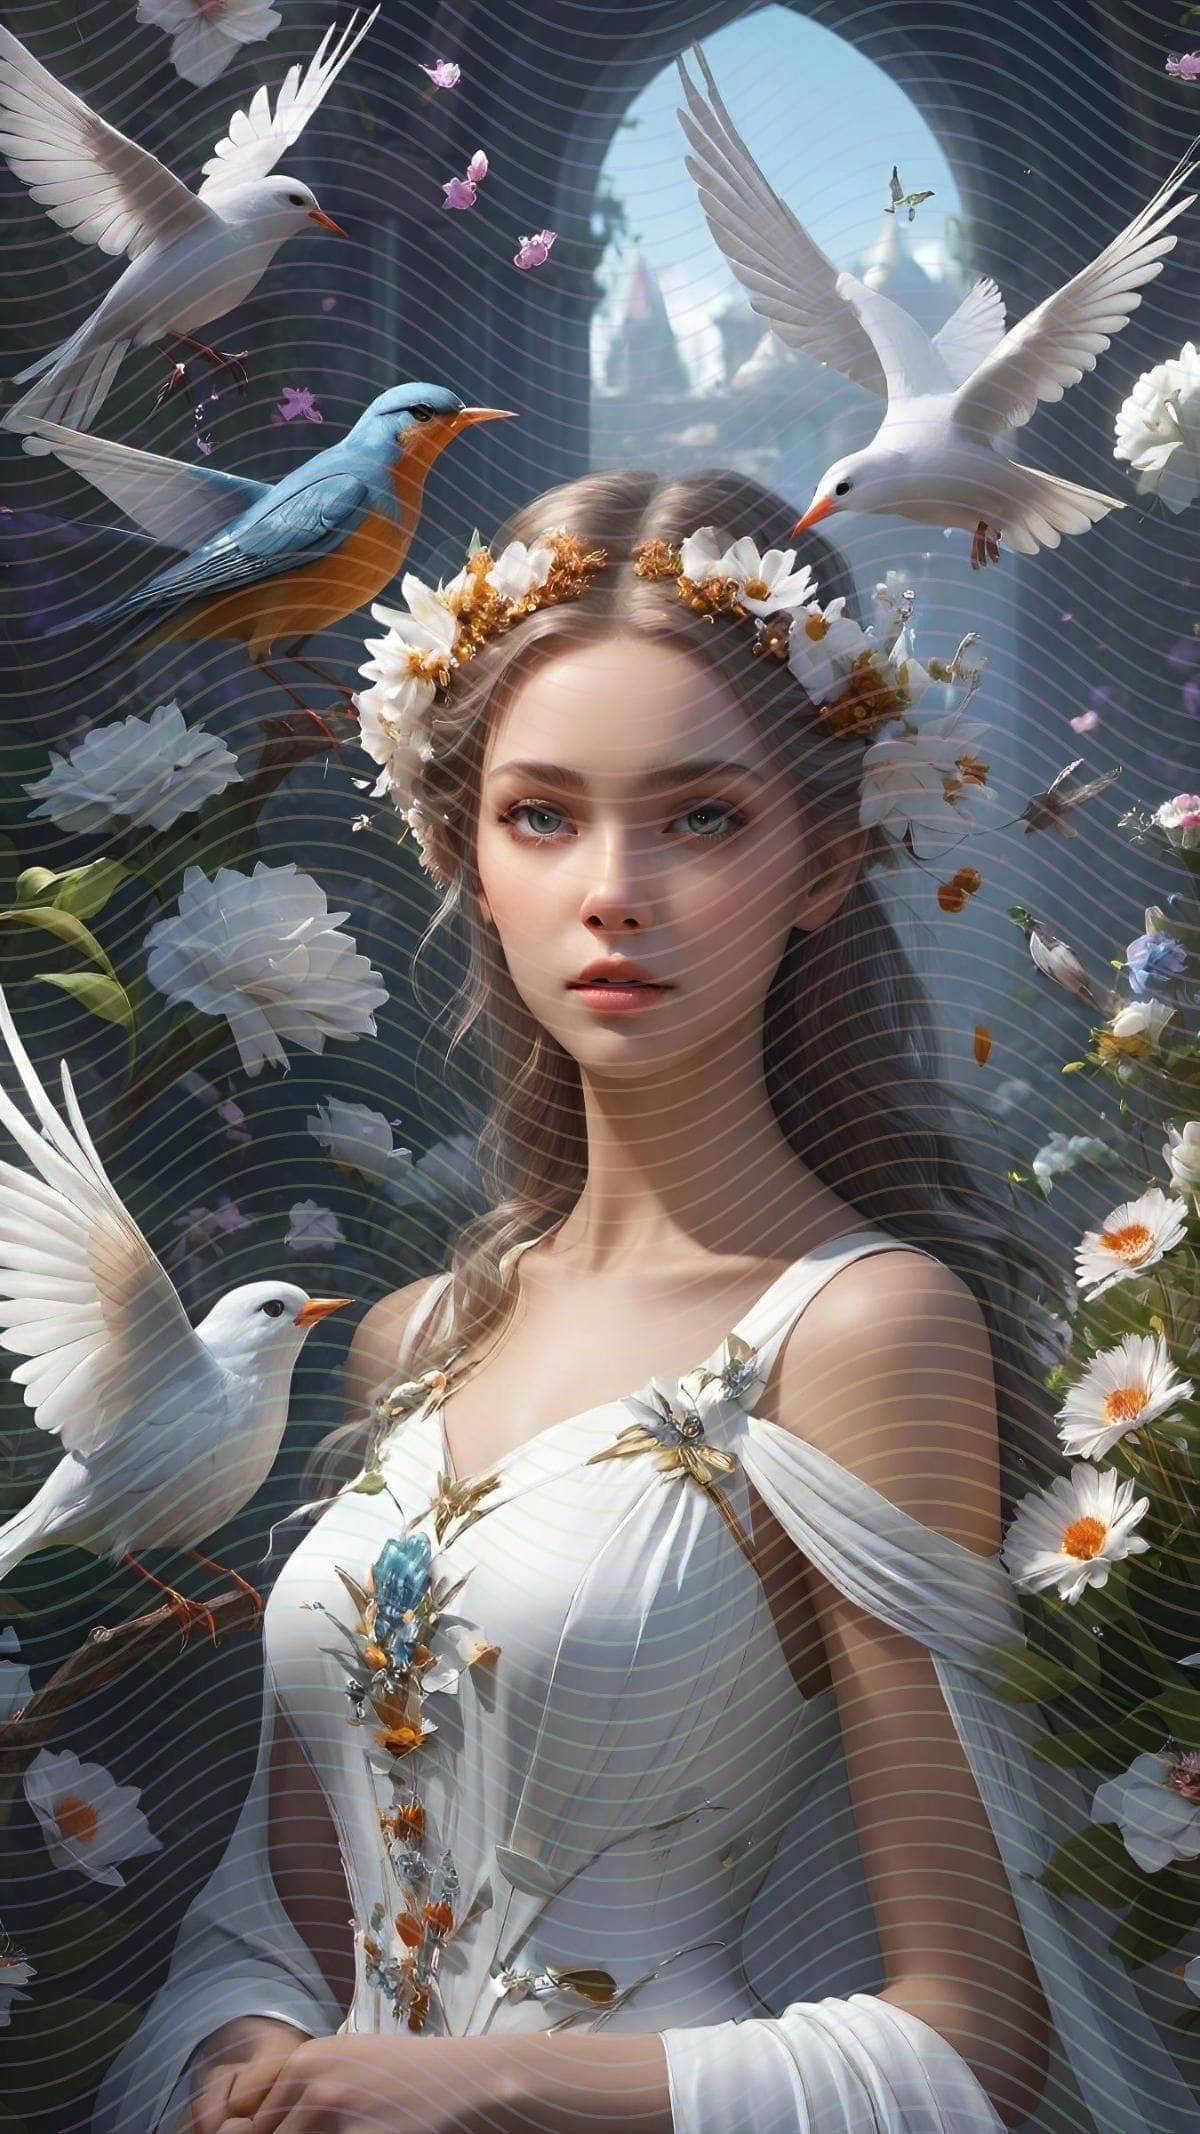 A Woman in A White Dress Surrounded by Birds